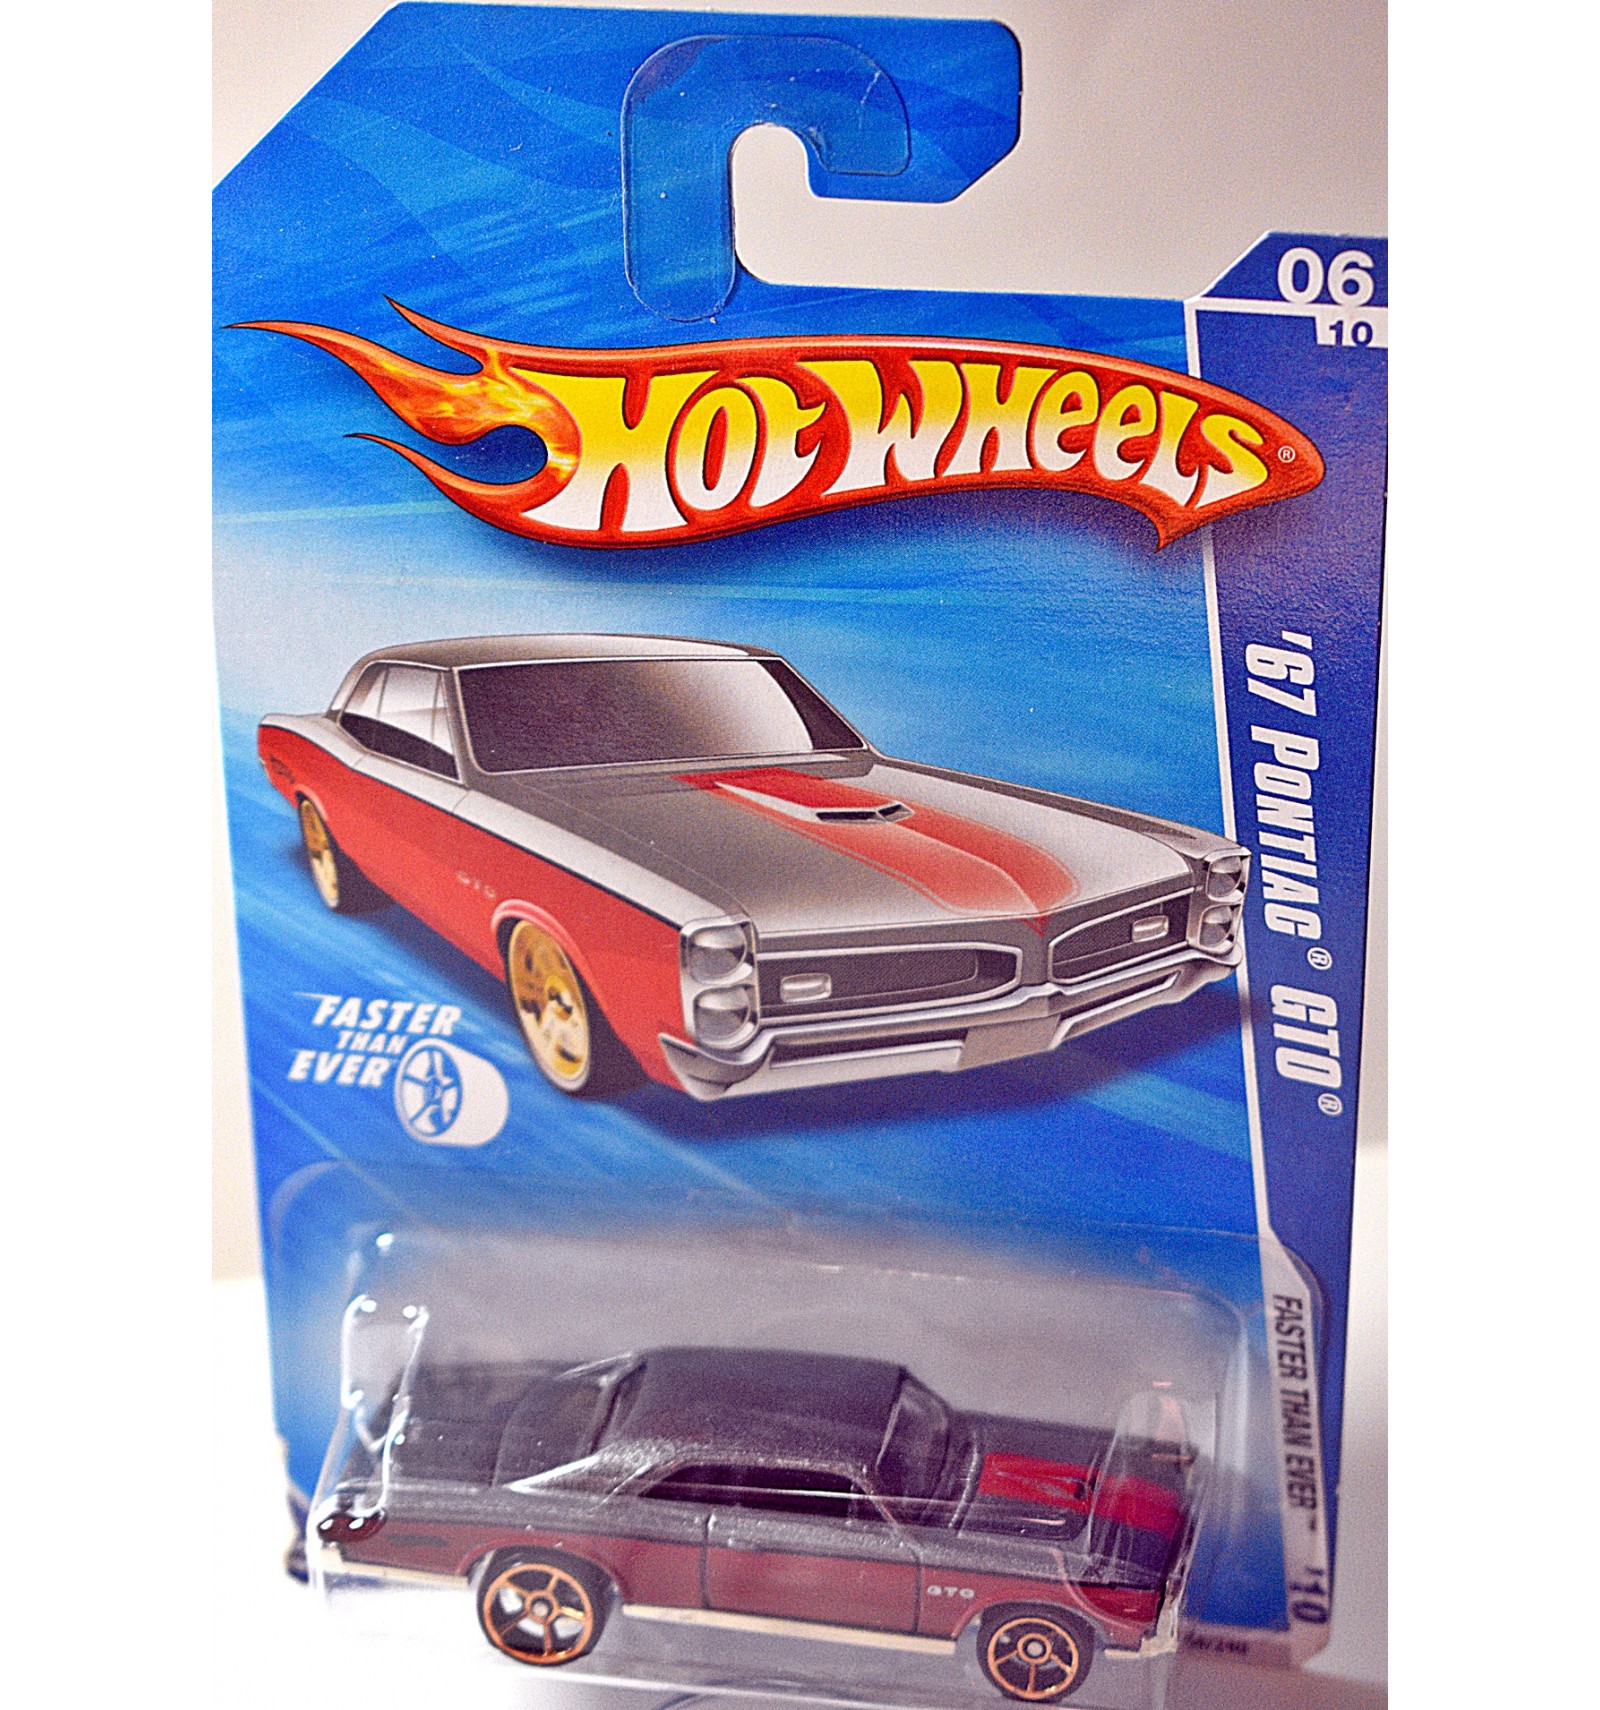 hot wheels classics series 2 1967 pontiac gto #14 of 30 die-cast BODY & CHASSIS RED TRIM TIRES